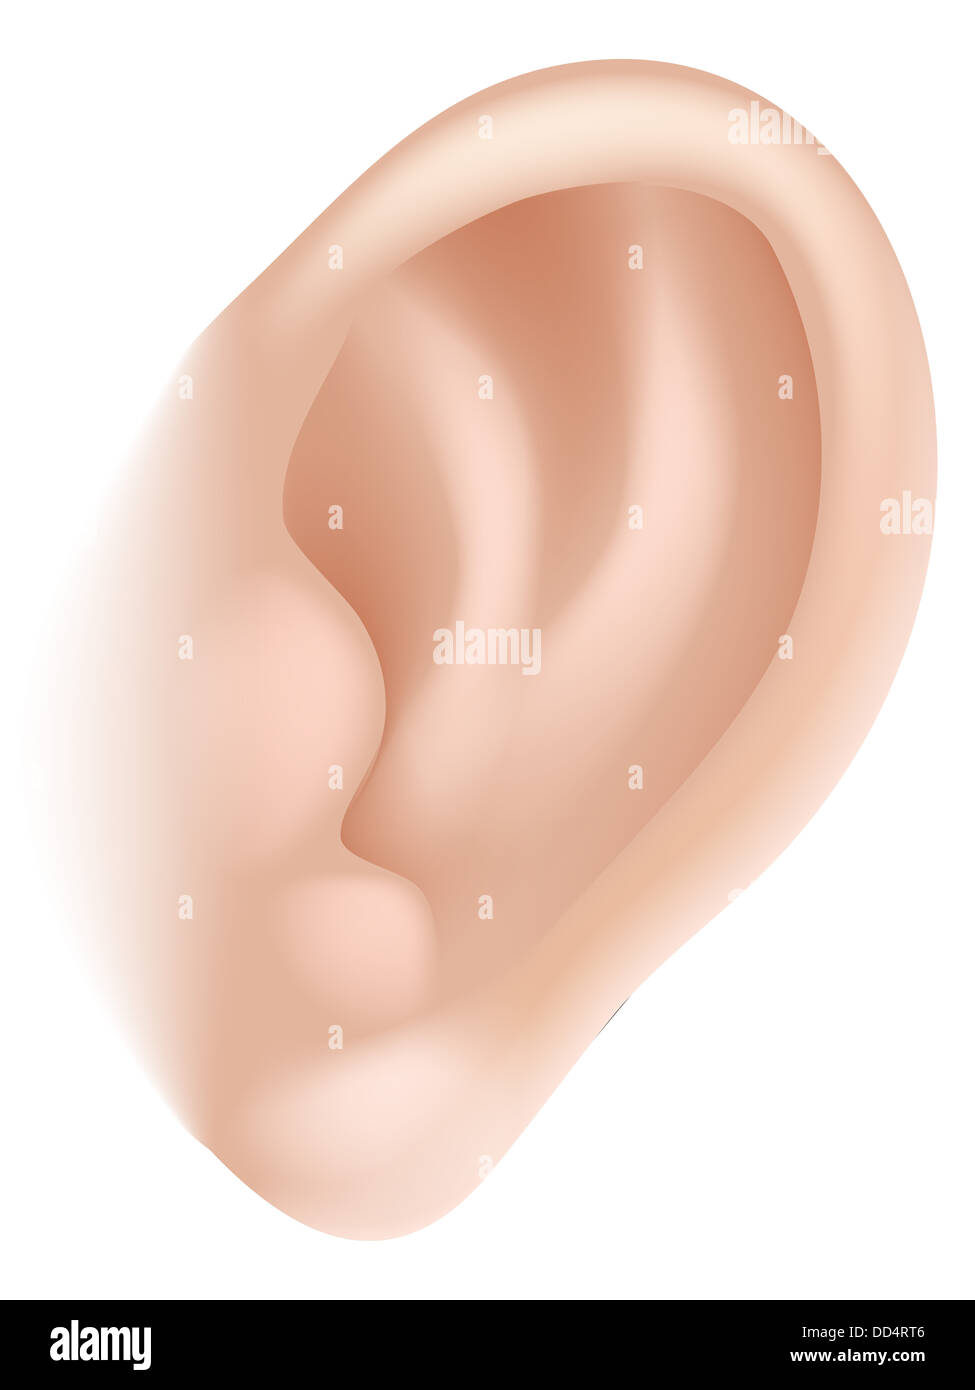 An illustration of a human ear body part, could represent hearing in the five senses Stock Photo